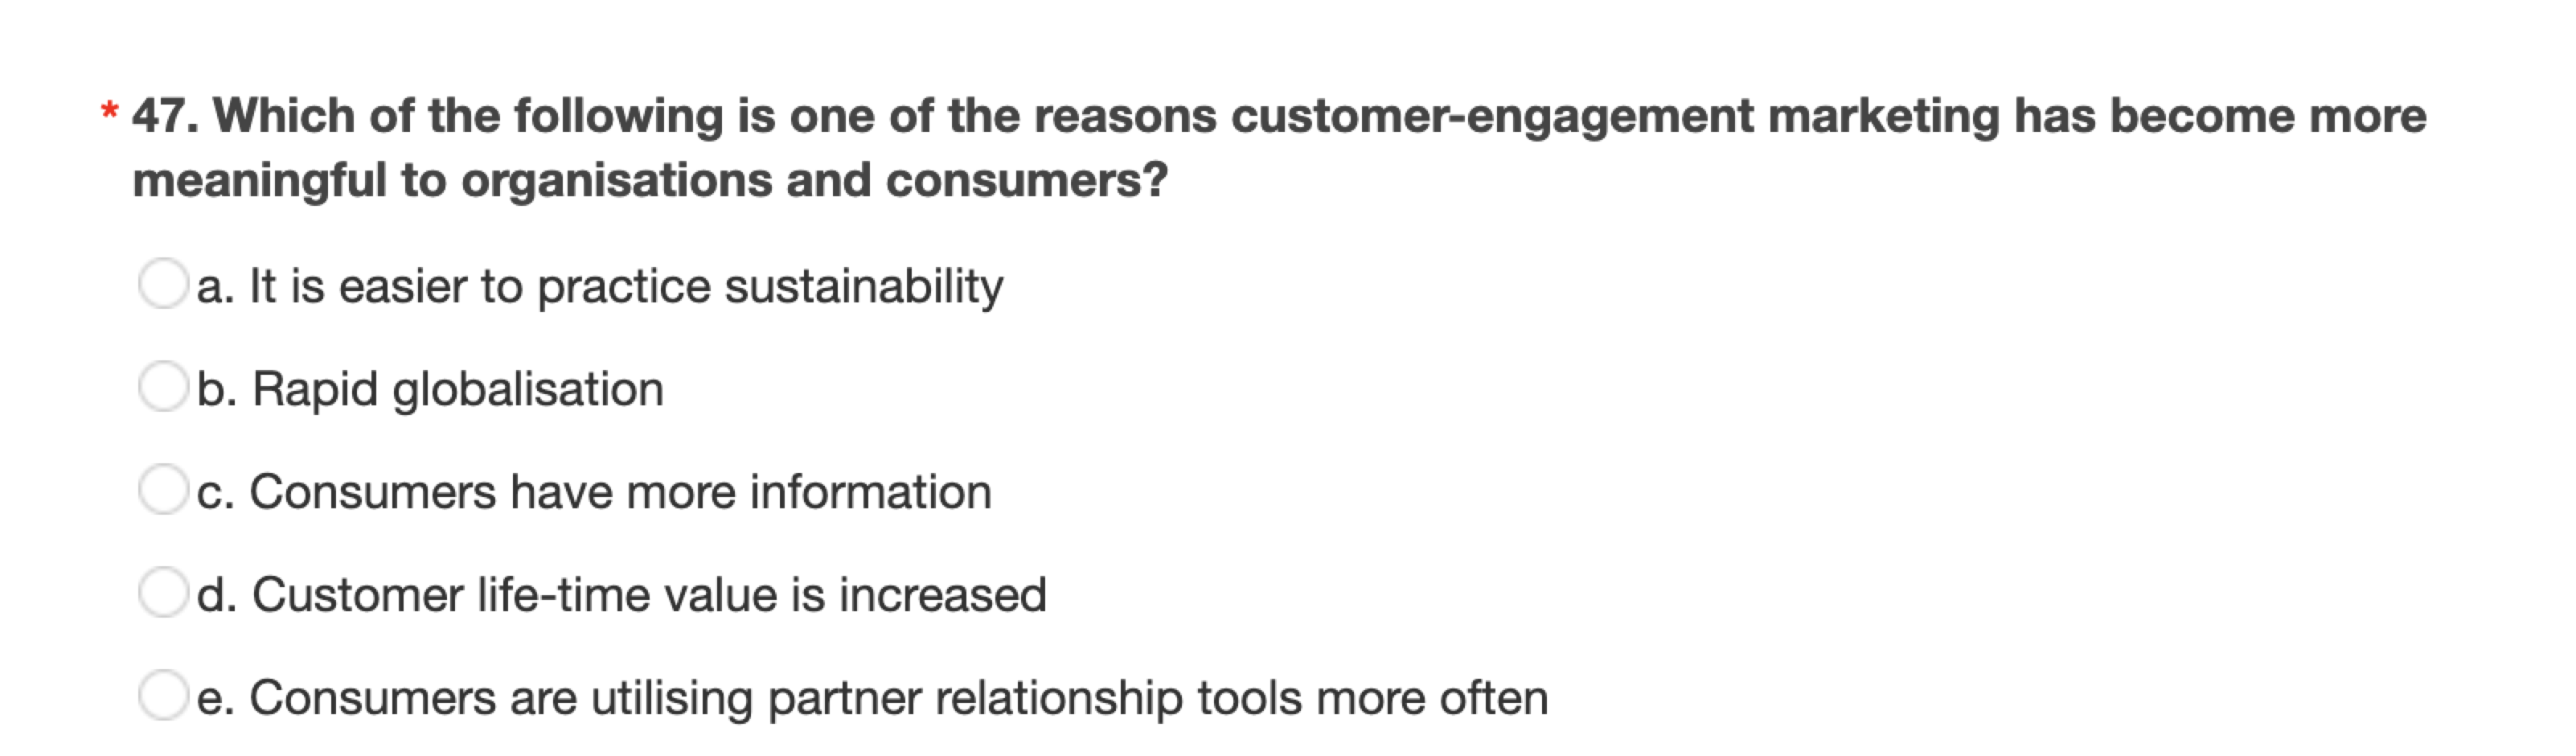 Which of the following is one of the reasons customer-engagement marketing has become more...